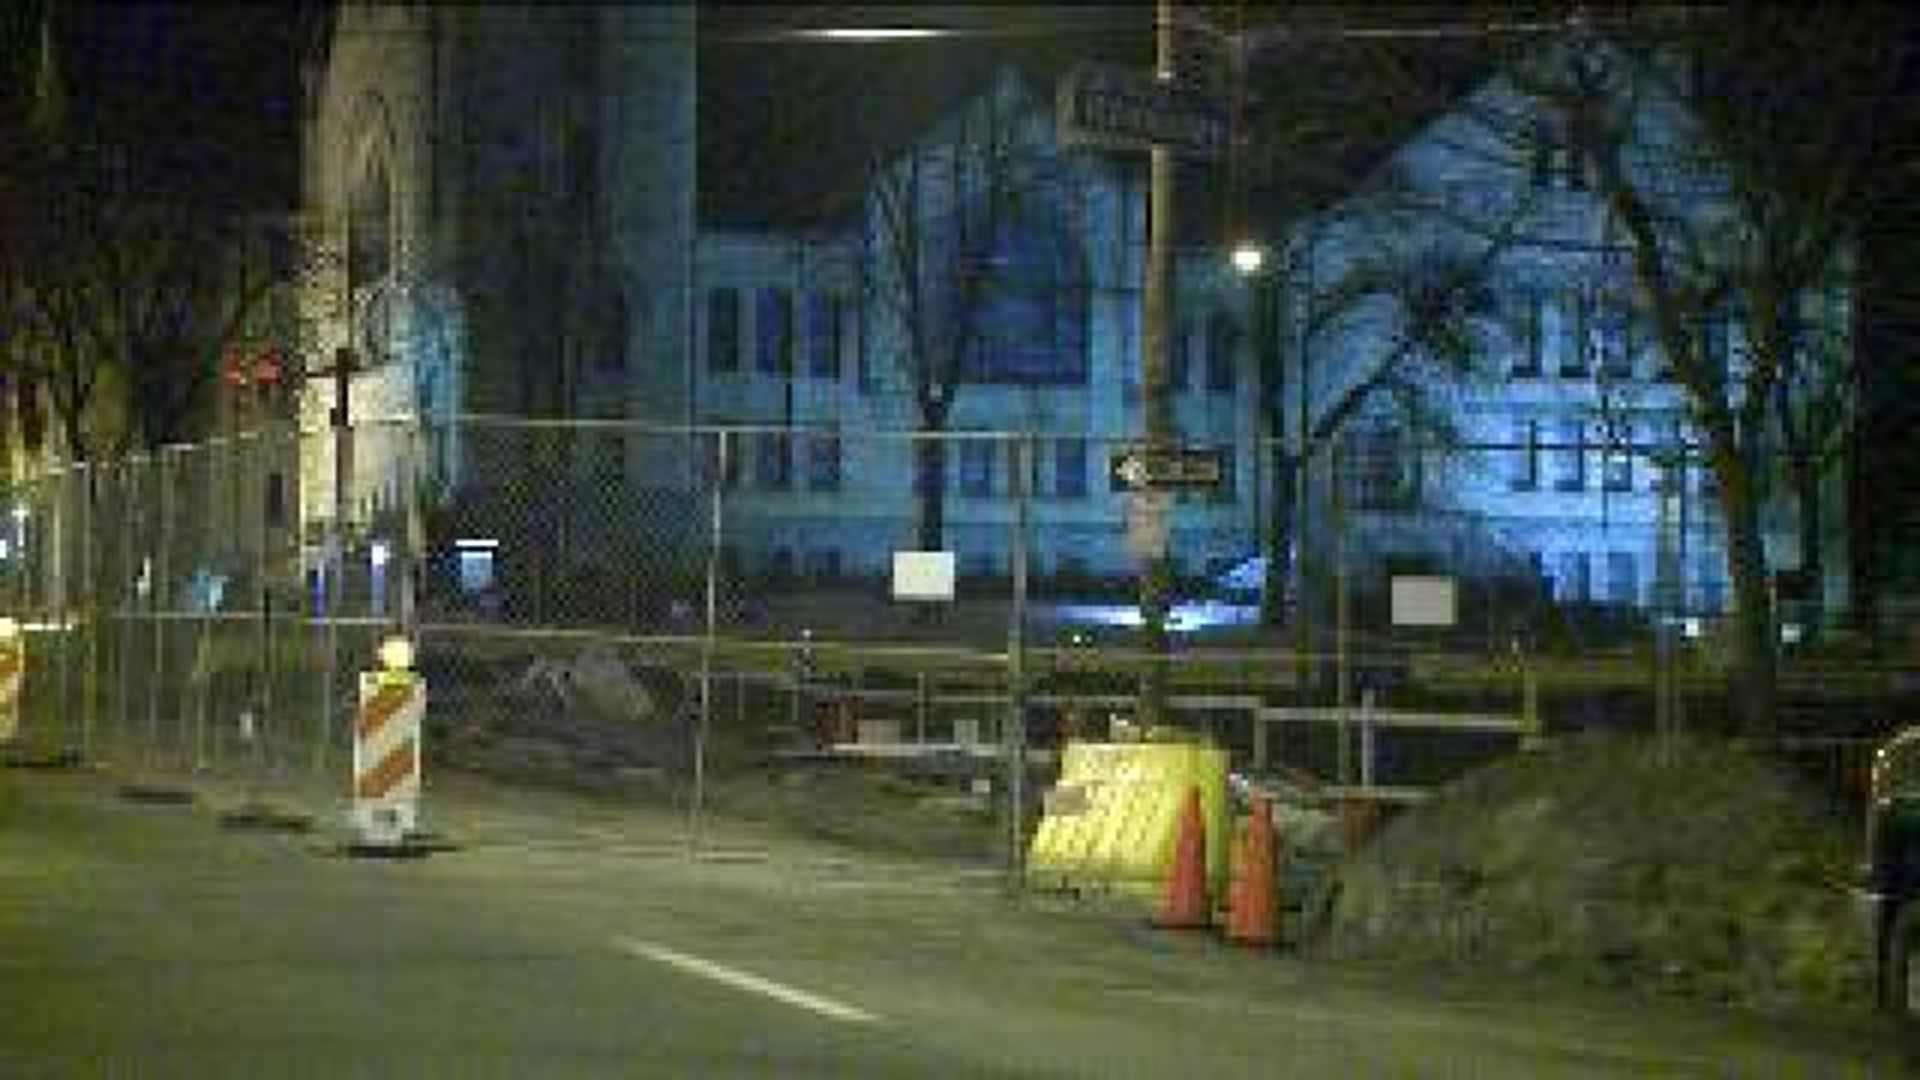 New Construction Means New Traffic Change In Downtown Scranton